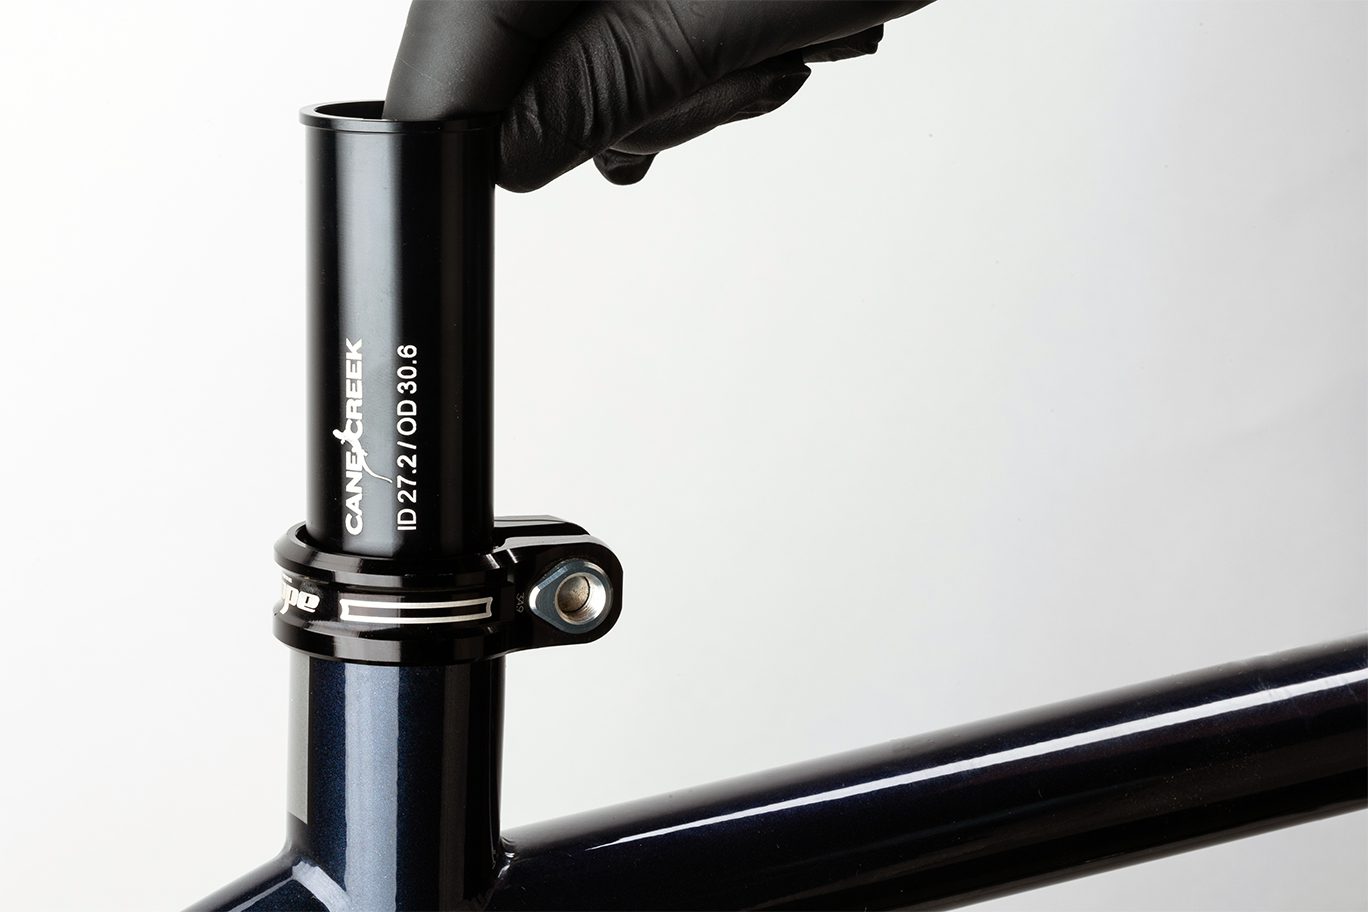 Seatpost-Adapter-lifestyle-gallery-1-1368-x-912